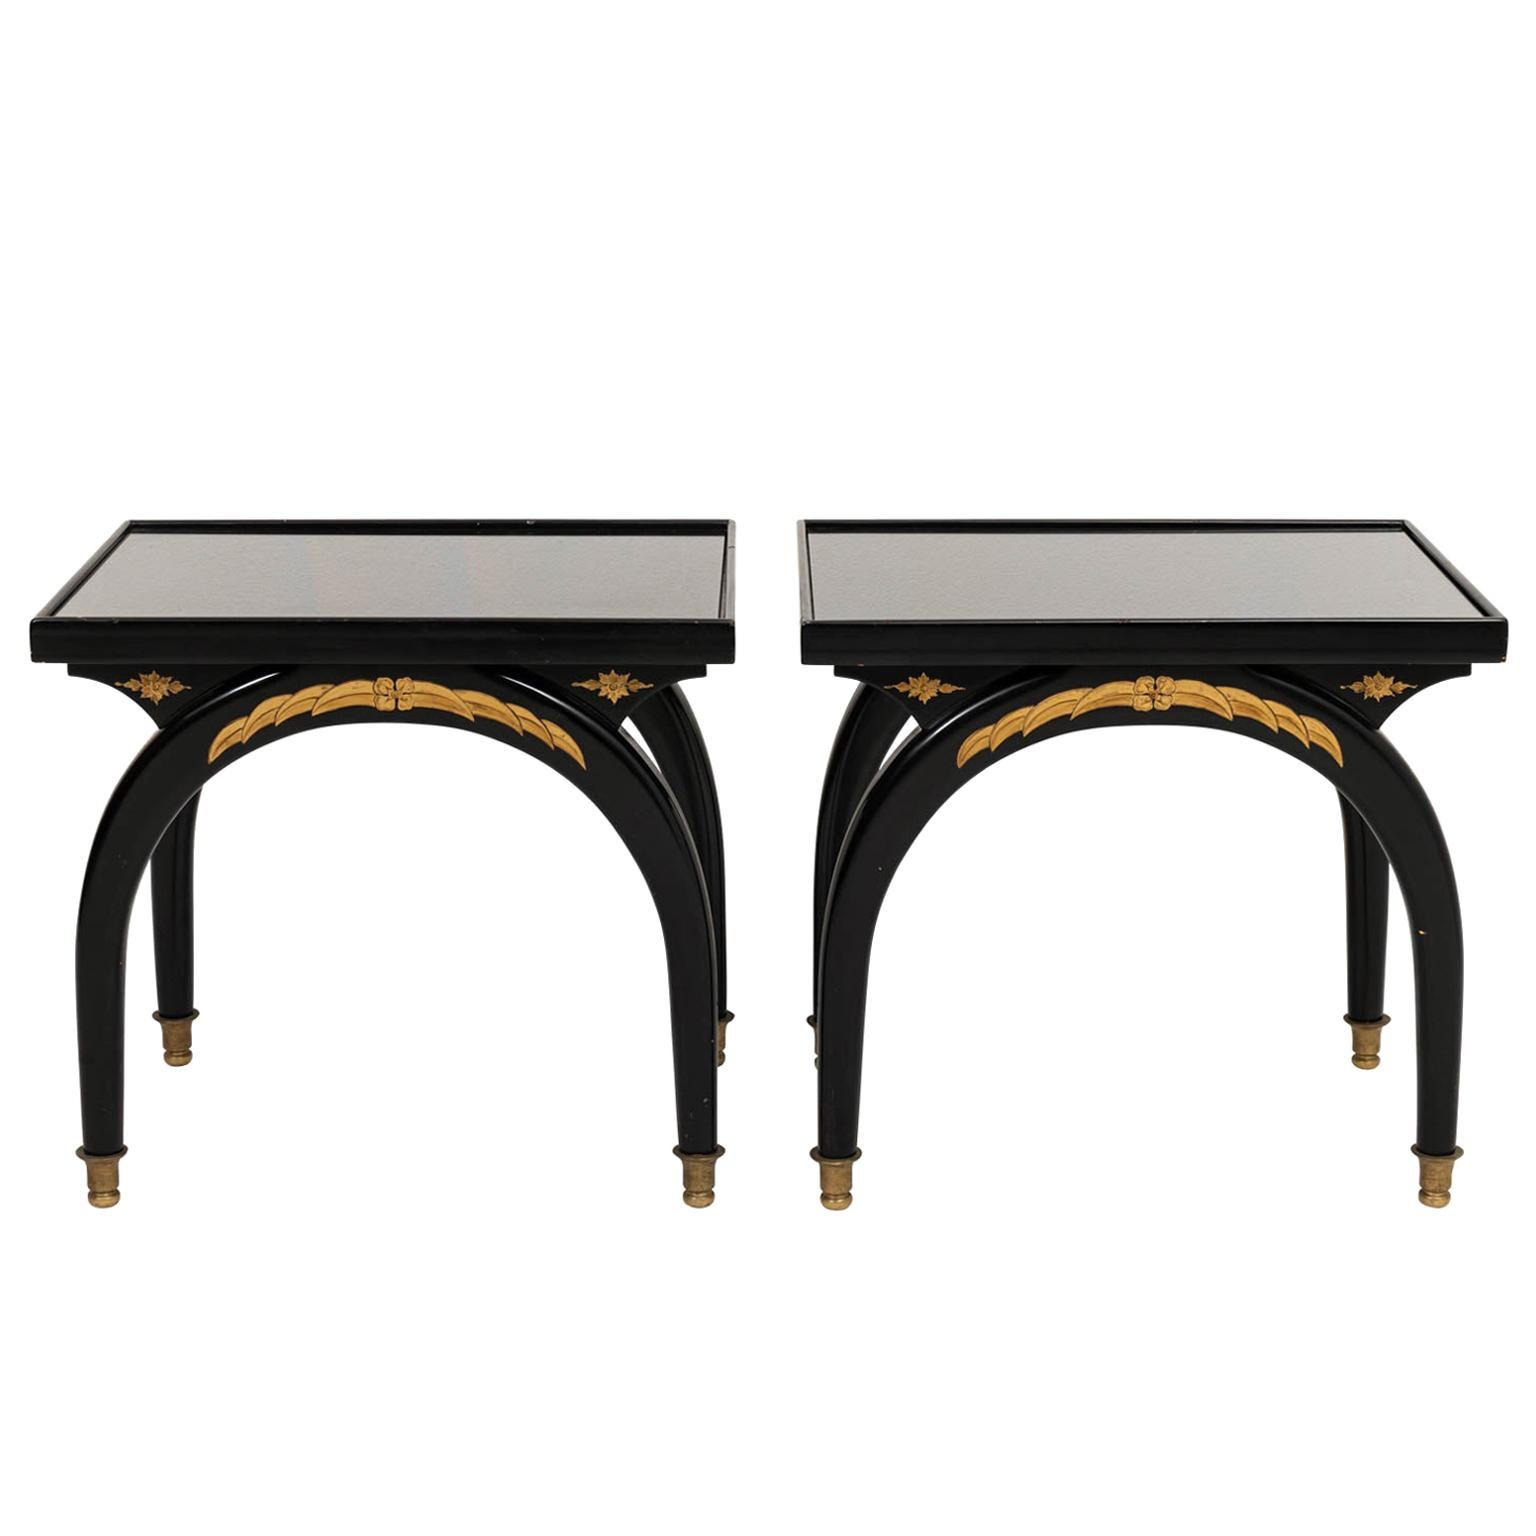 Pair of Art Deco Style Black Rectangular Side Tables with Glass Top